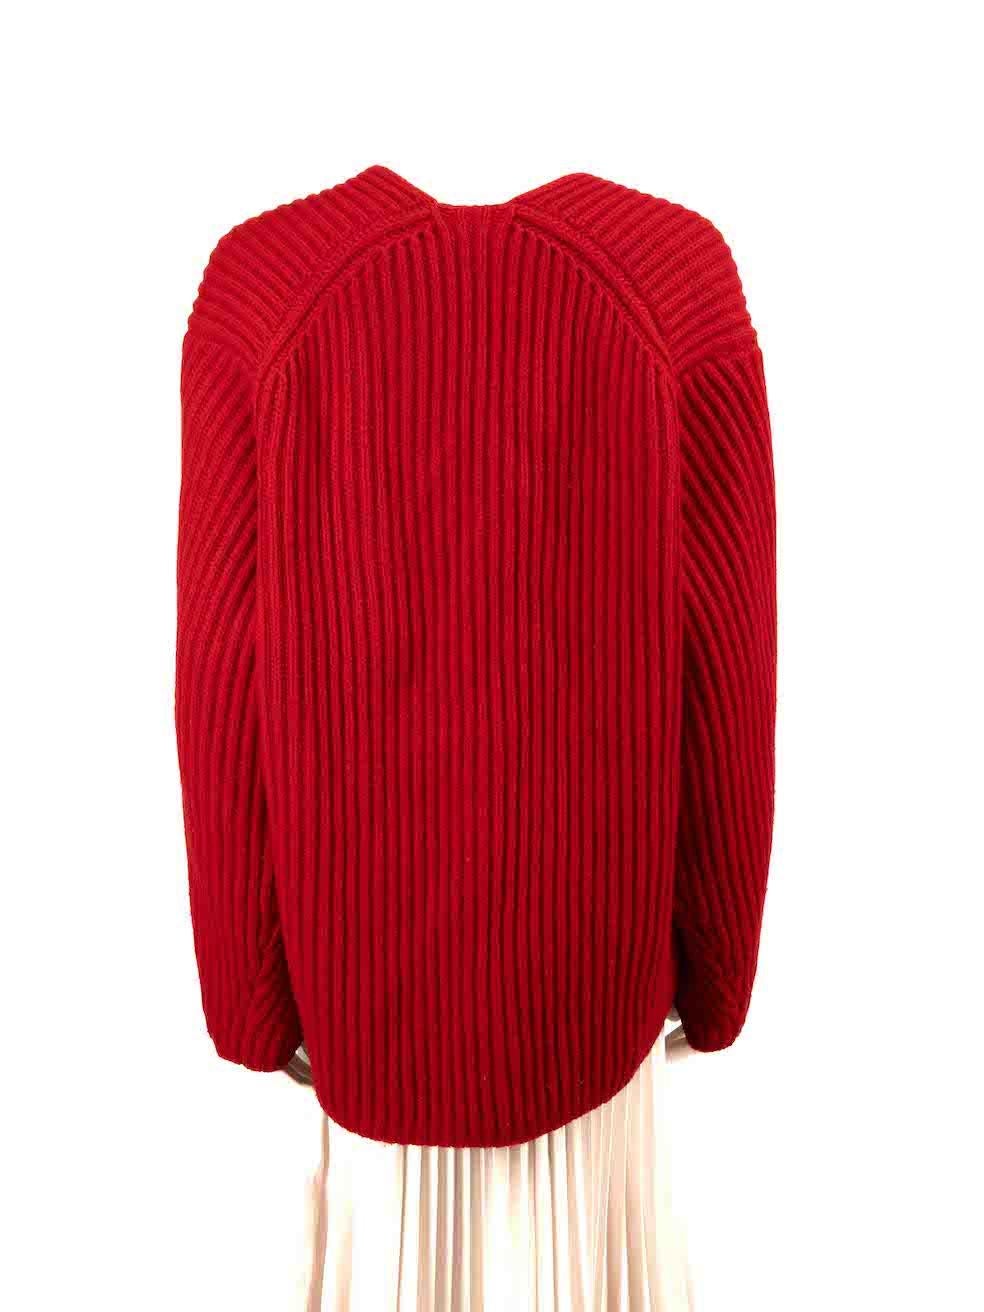 Acne Studios Red Wool Knit Jumper Size M In Good Condition For Sale In London, GB